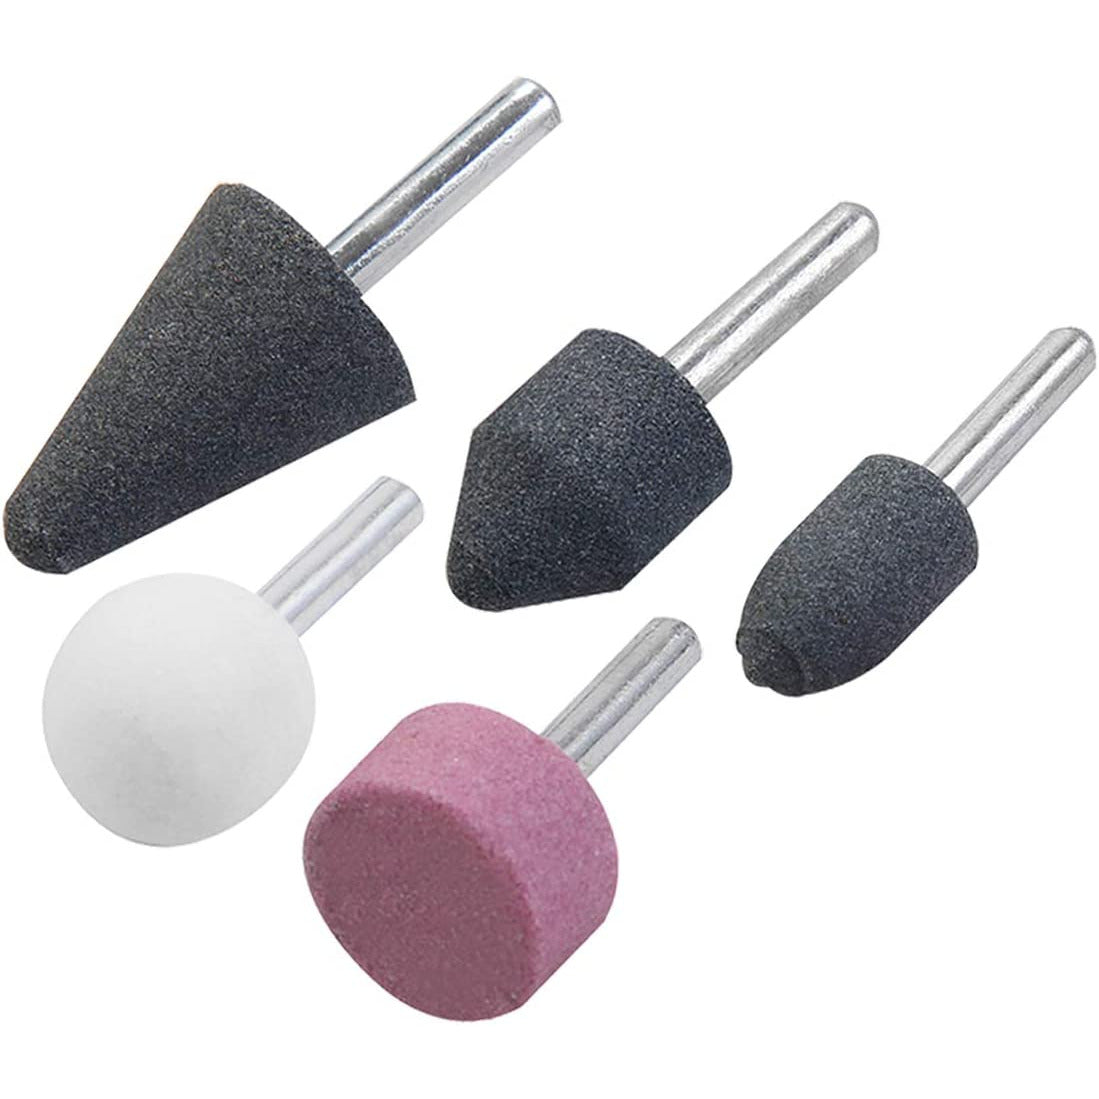 5 Piece Grinding stone Set | Rotary Grinding Bits with 1/4" Shank - South East Clearance Centre